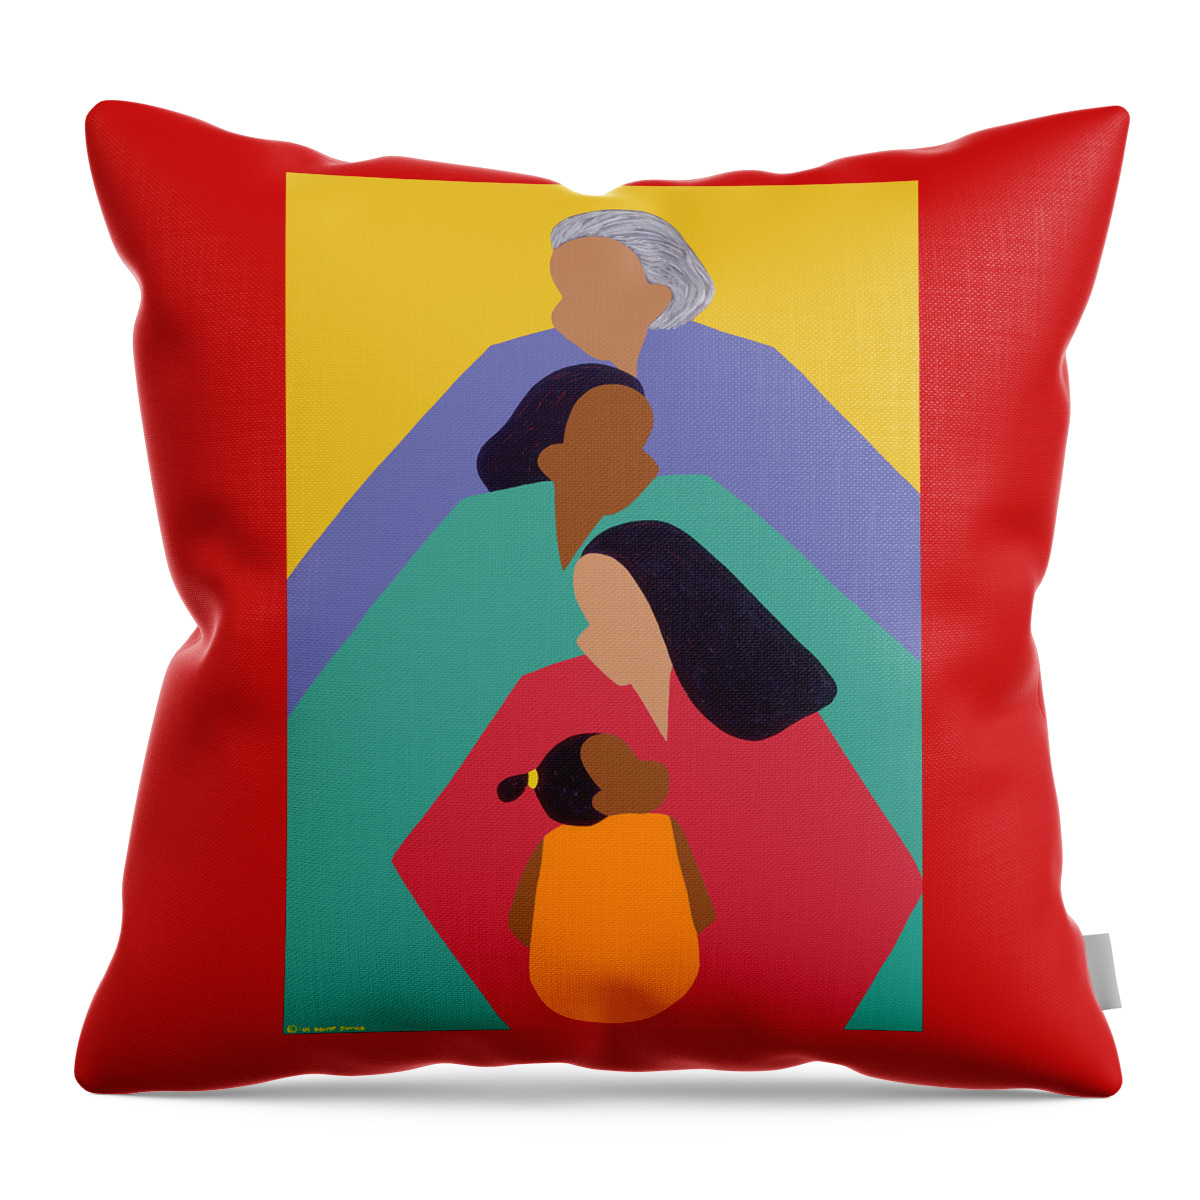 Four Generations Throw Pillow featuring the painting Generations by Synthia SAINT JAMES